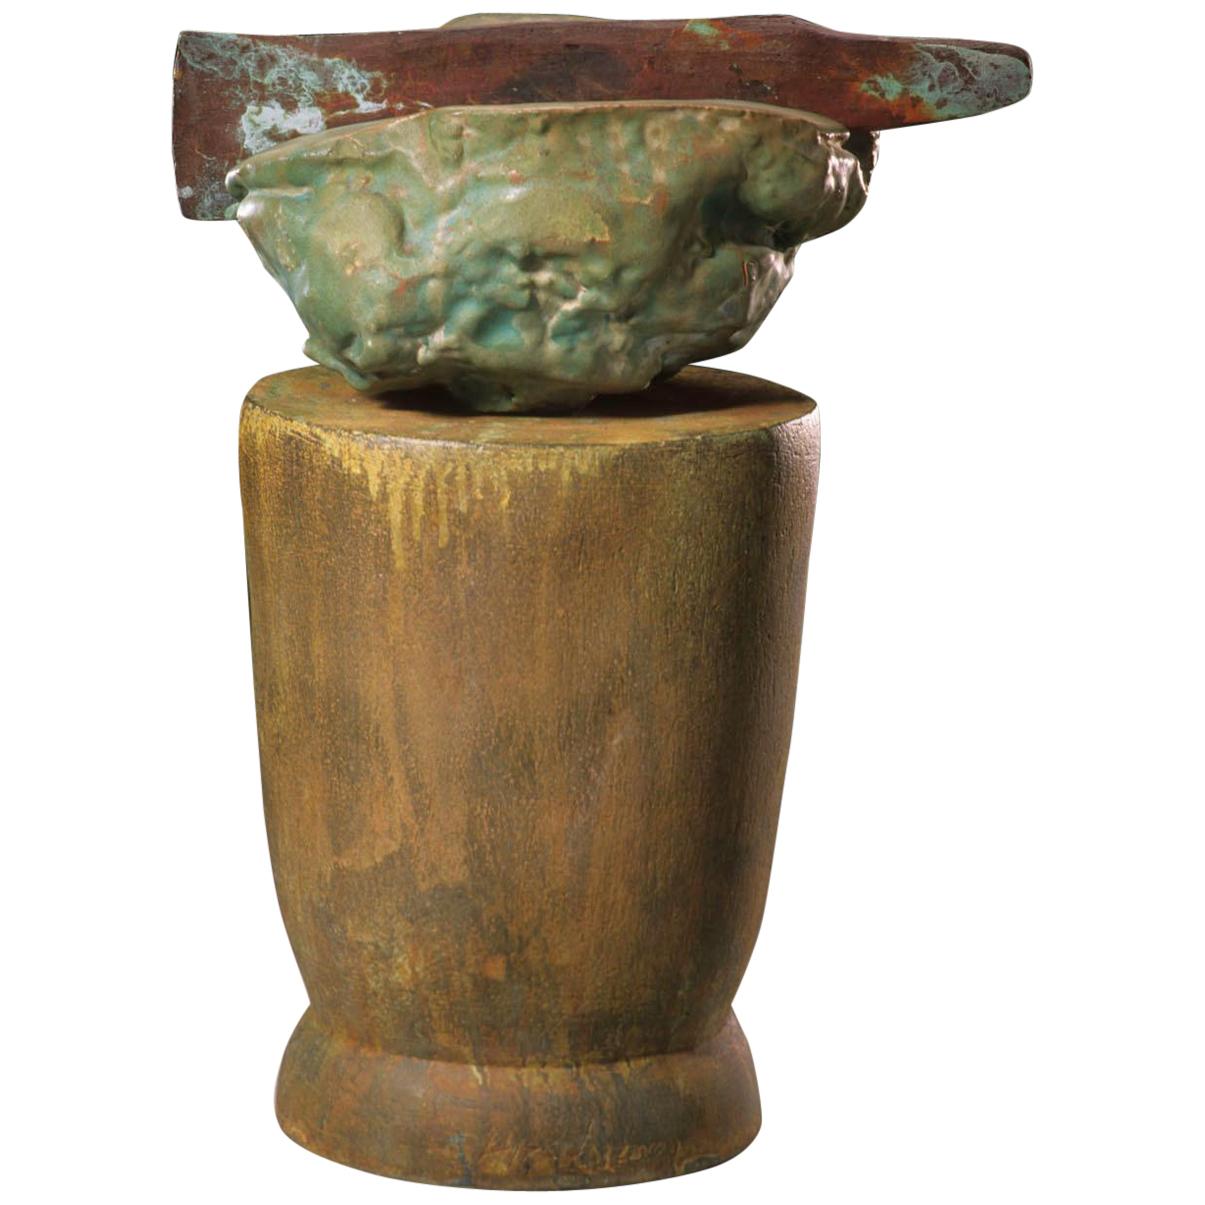 Richard Hirsch Ceramic Altar Bowl with Weapon Sculpture, 2000 For Sale